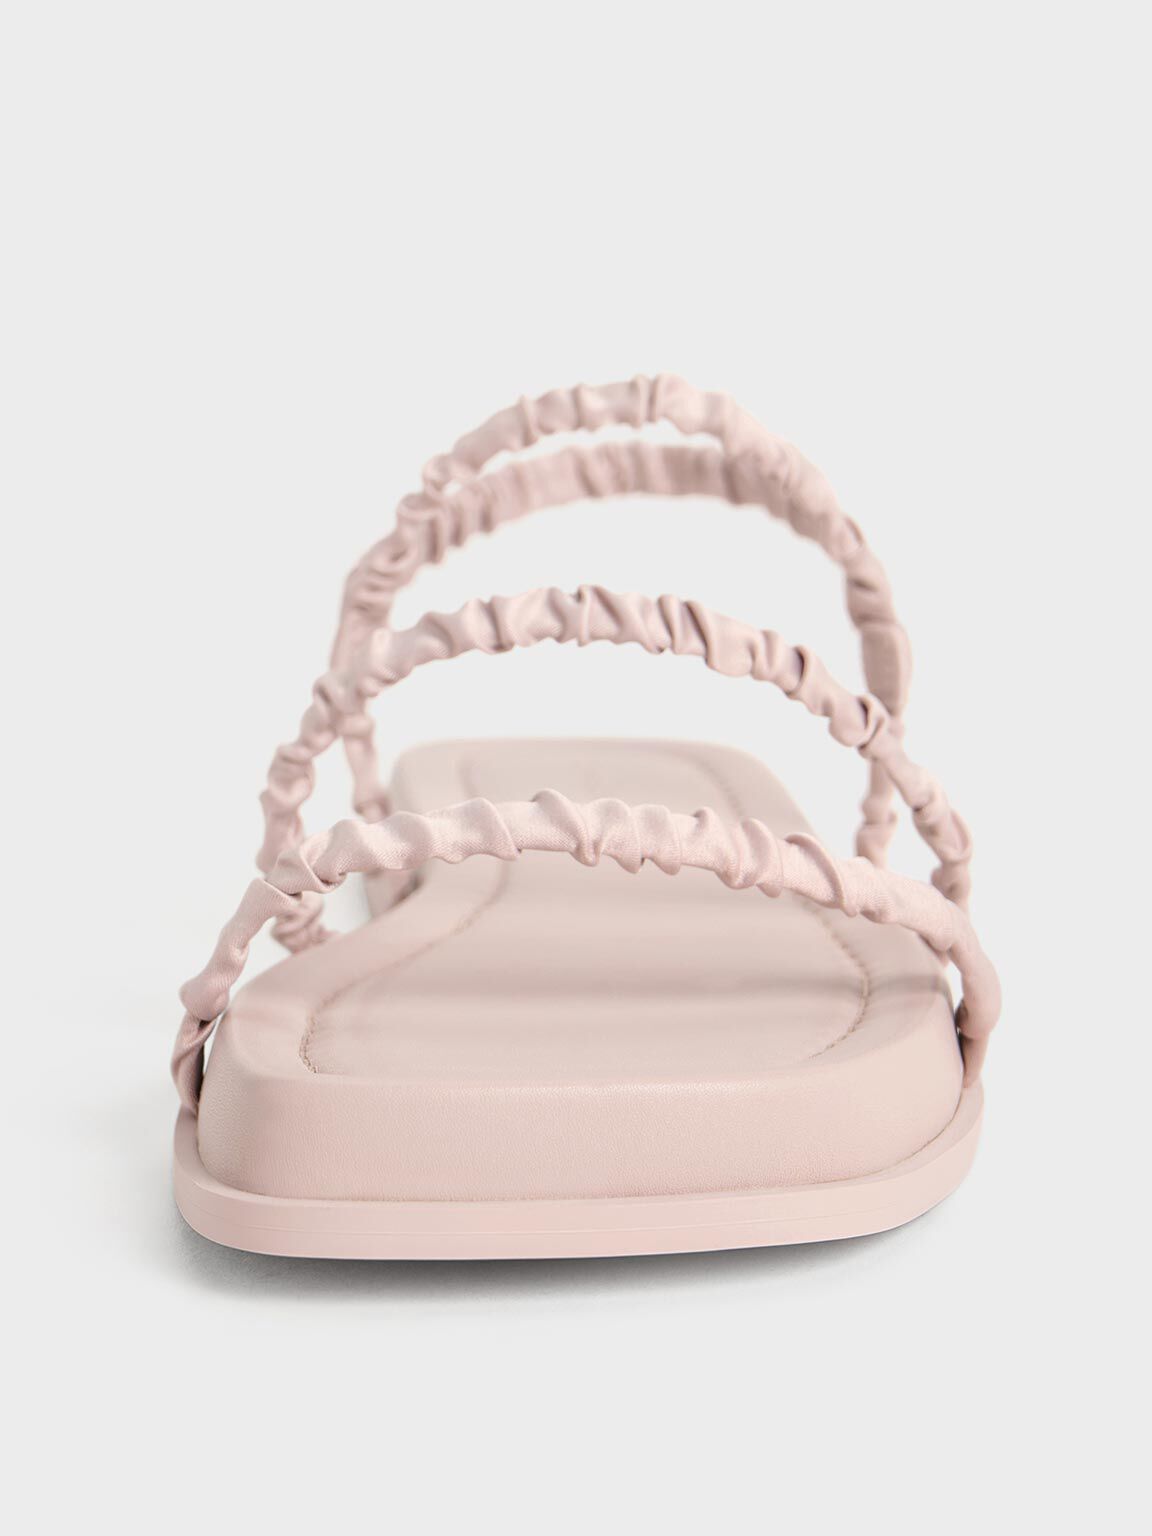 Recycled Polyester Ruched Strappy Sandals, Nude, hi-res